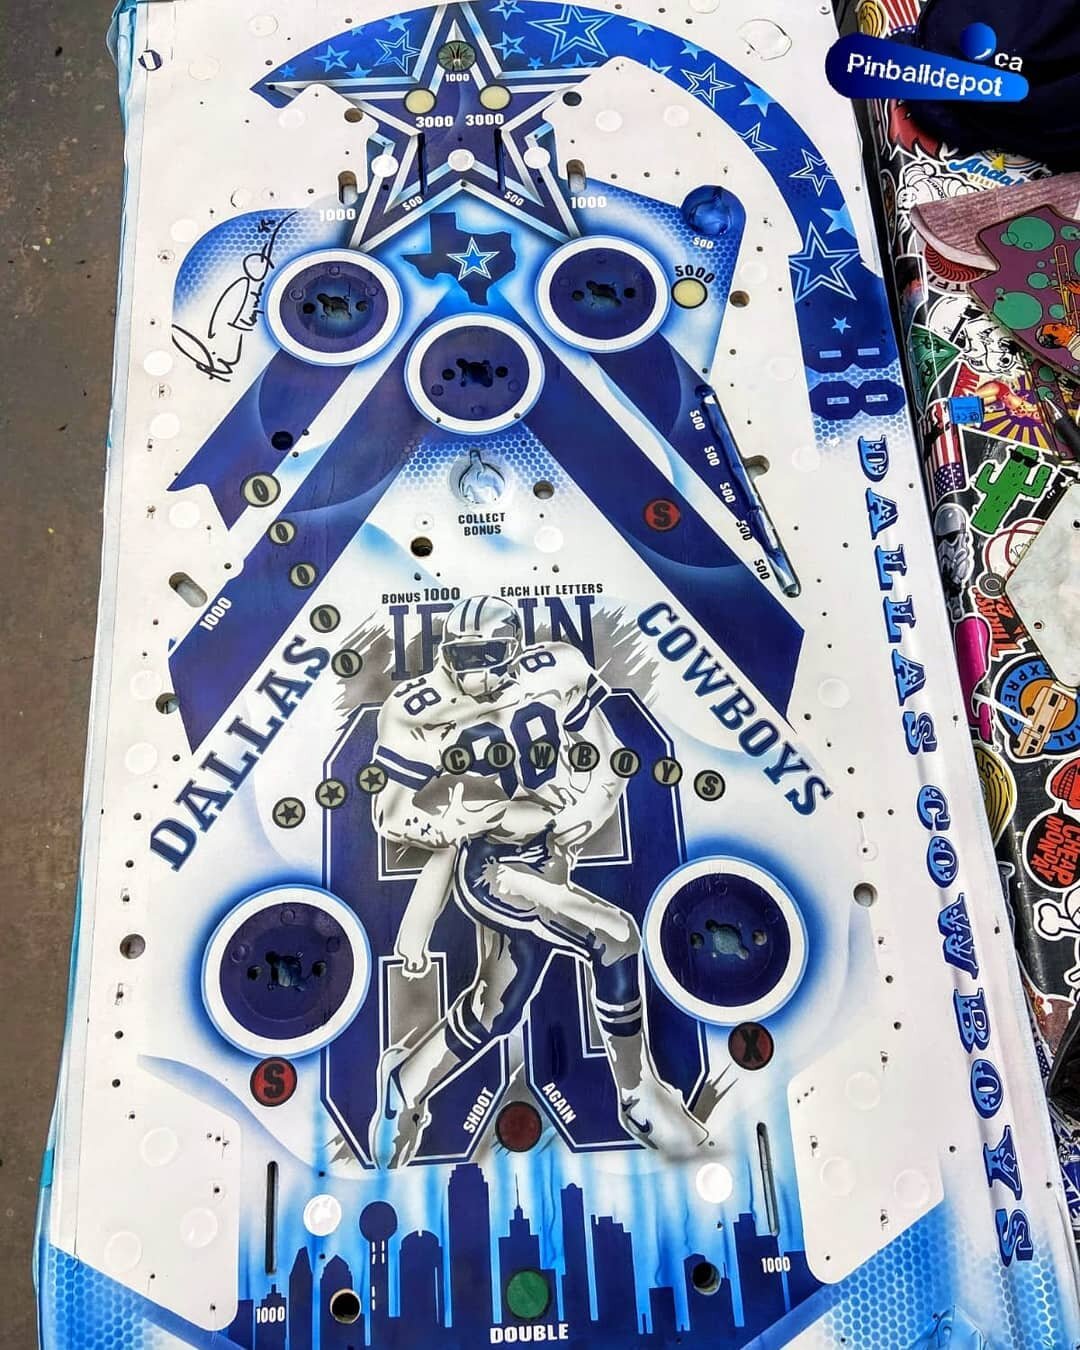 Who else is excited about Texas Pinball Festival this March!? 🔥 Come check out our new rethemed Dallas Cowbows Pinball! 🏈 We&rsquo;ll be there to help you order your custom rethemed pinball on the pinball machine of your choice! We can customize it